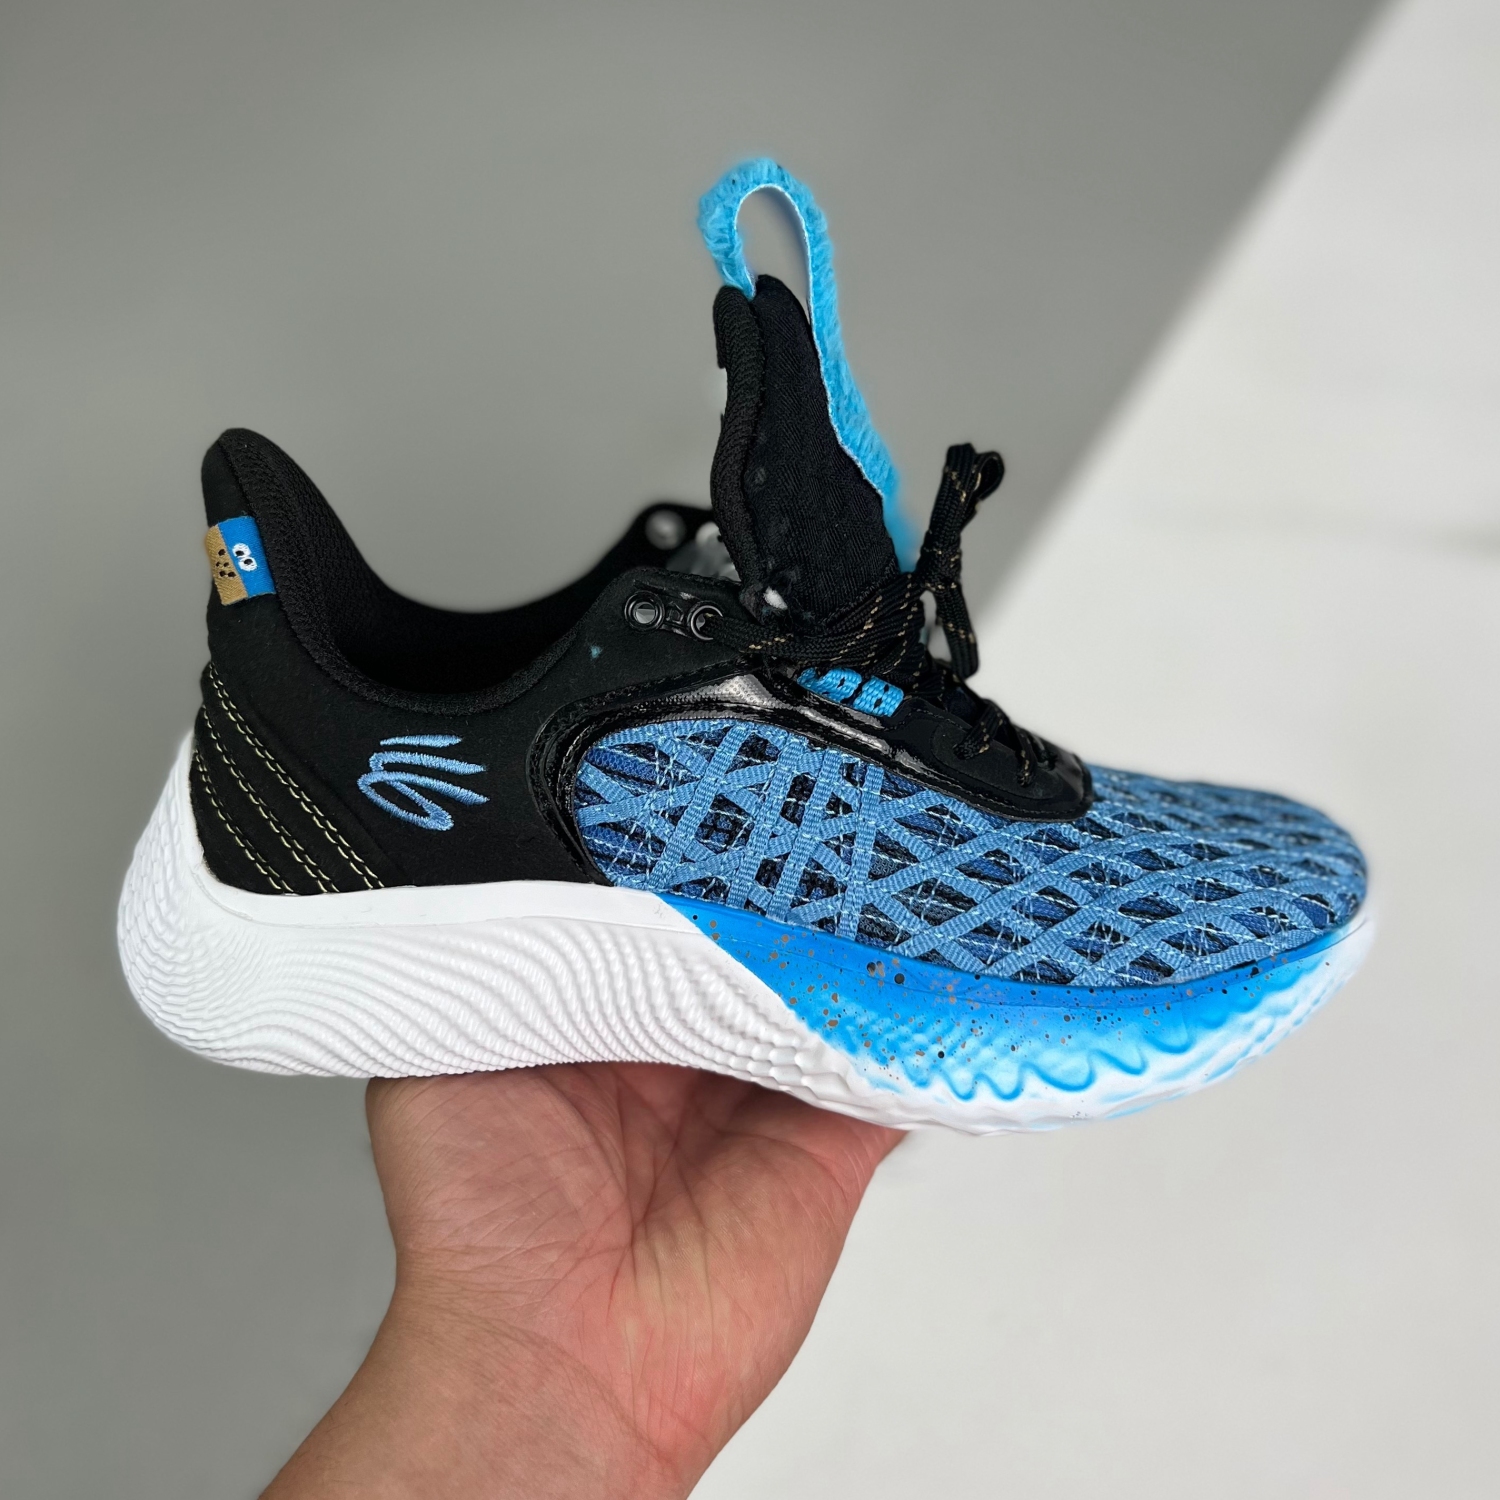 Under Armour Curry Flow 9 x Sesame Street adult Basketball Shoes blue black